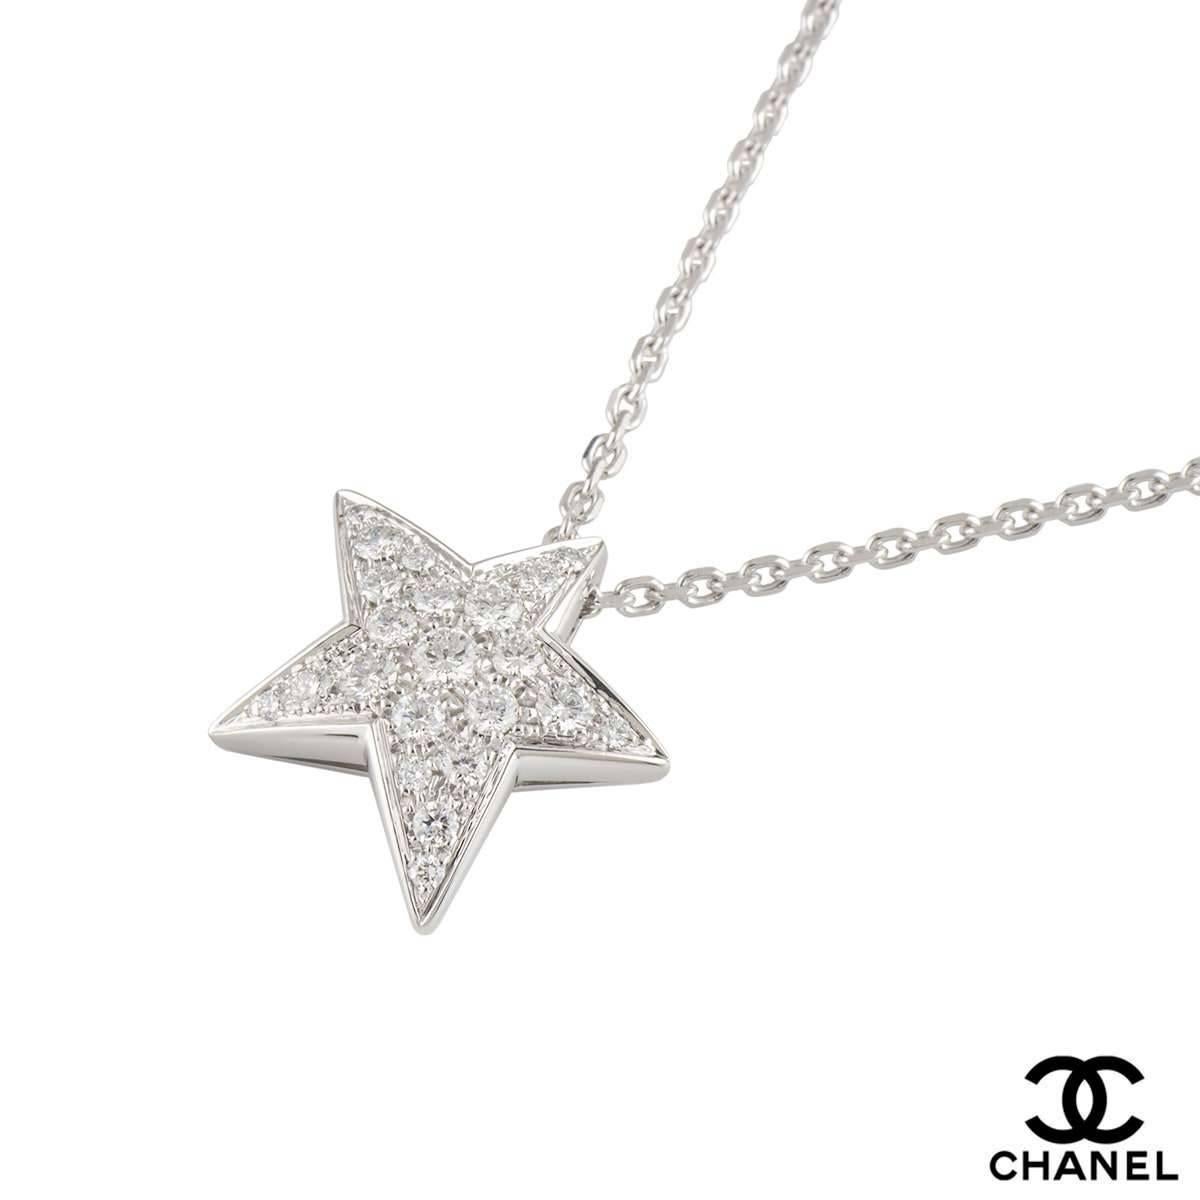 A sparkly 18k white gold diamond Chanel pendant from the Comete collection. The pendant comprises of a star motif with round brilliant cut diamonds pave set, with a total weight of 0.68ct, D-F colour and VVS1 clarity. The pendant features a 16 inch